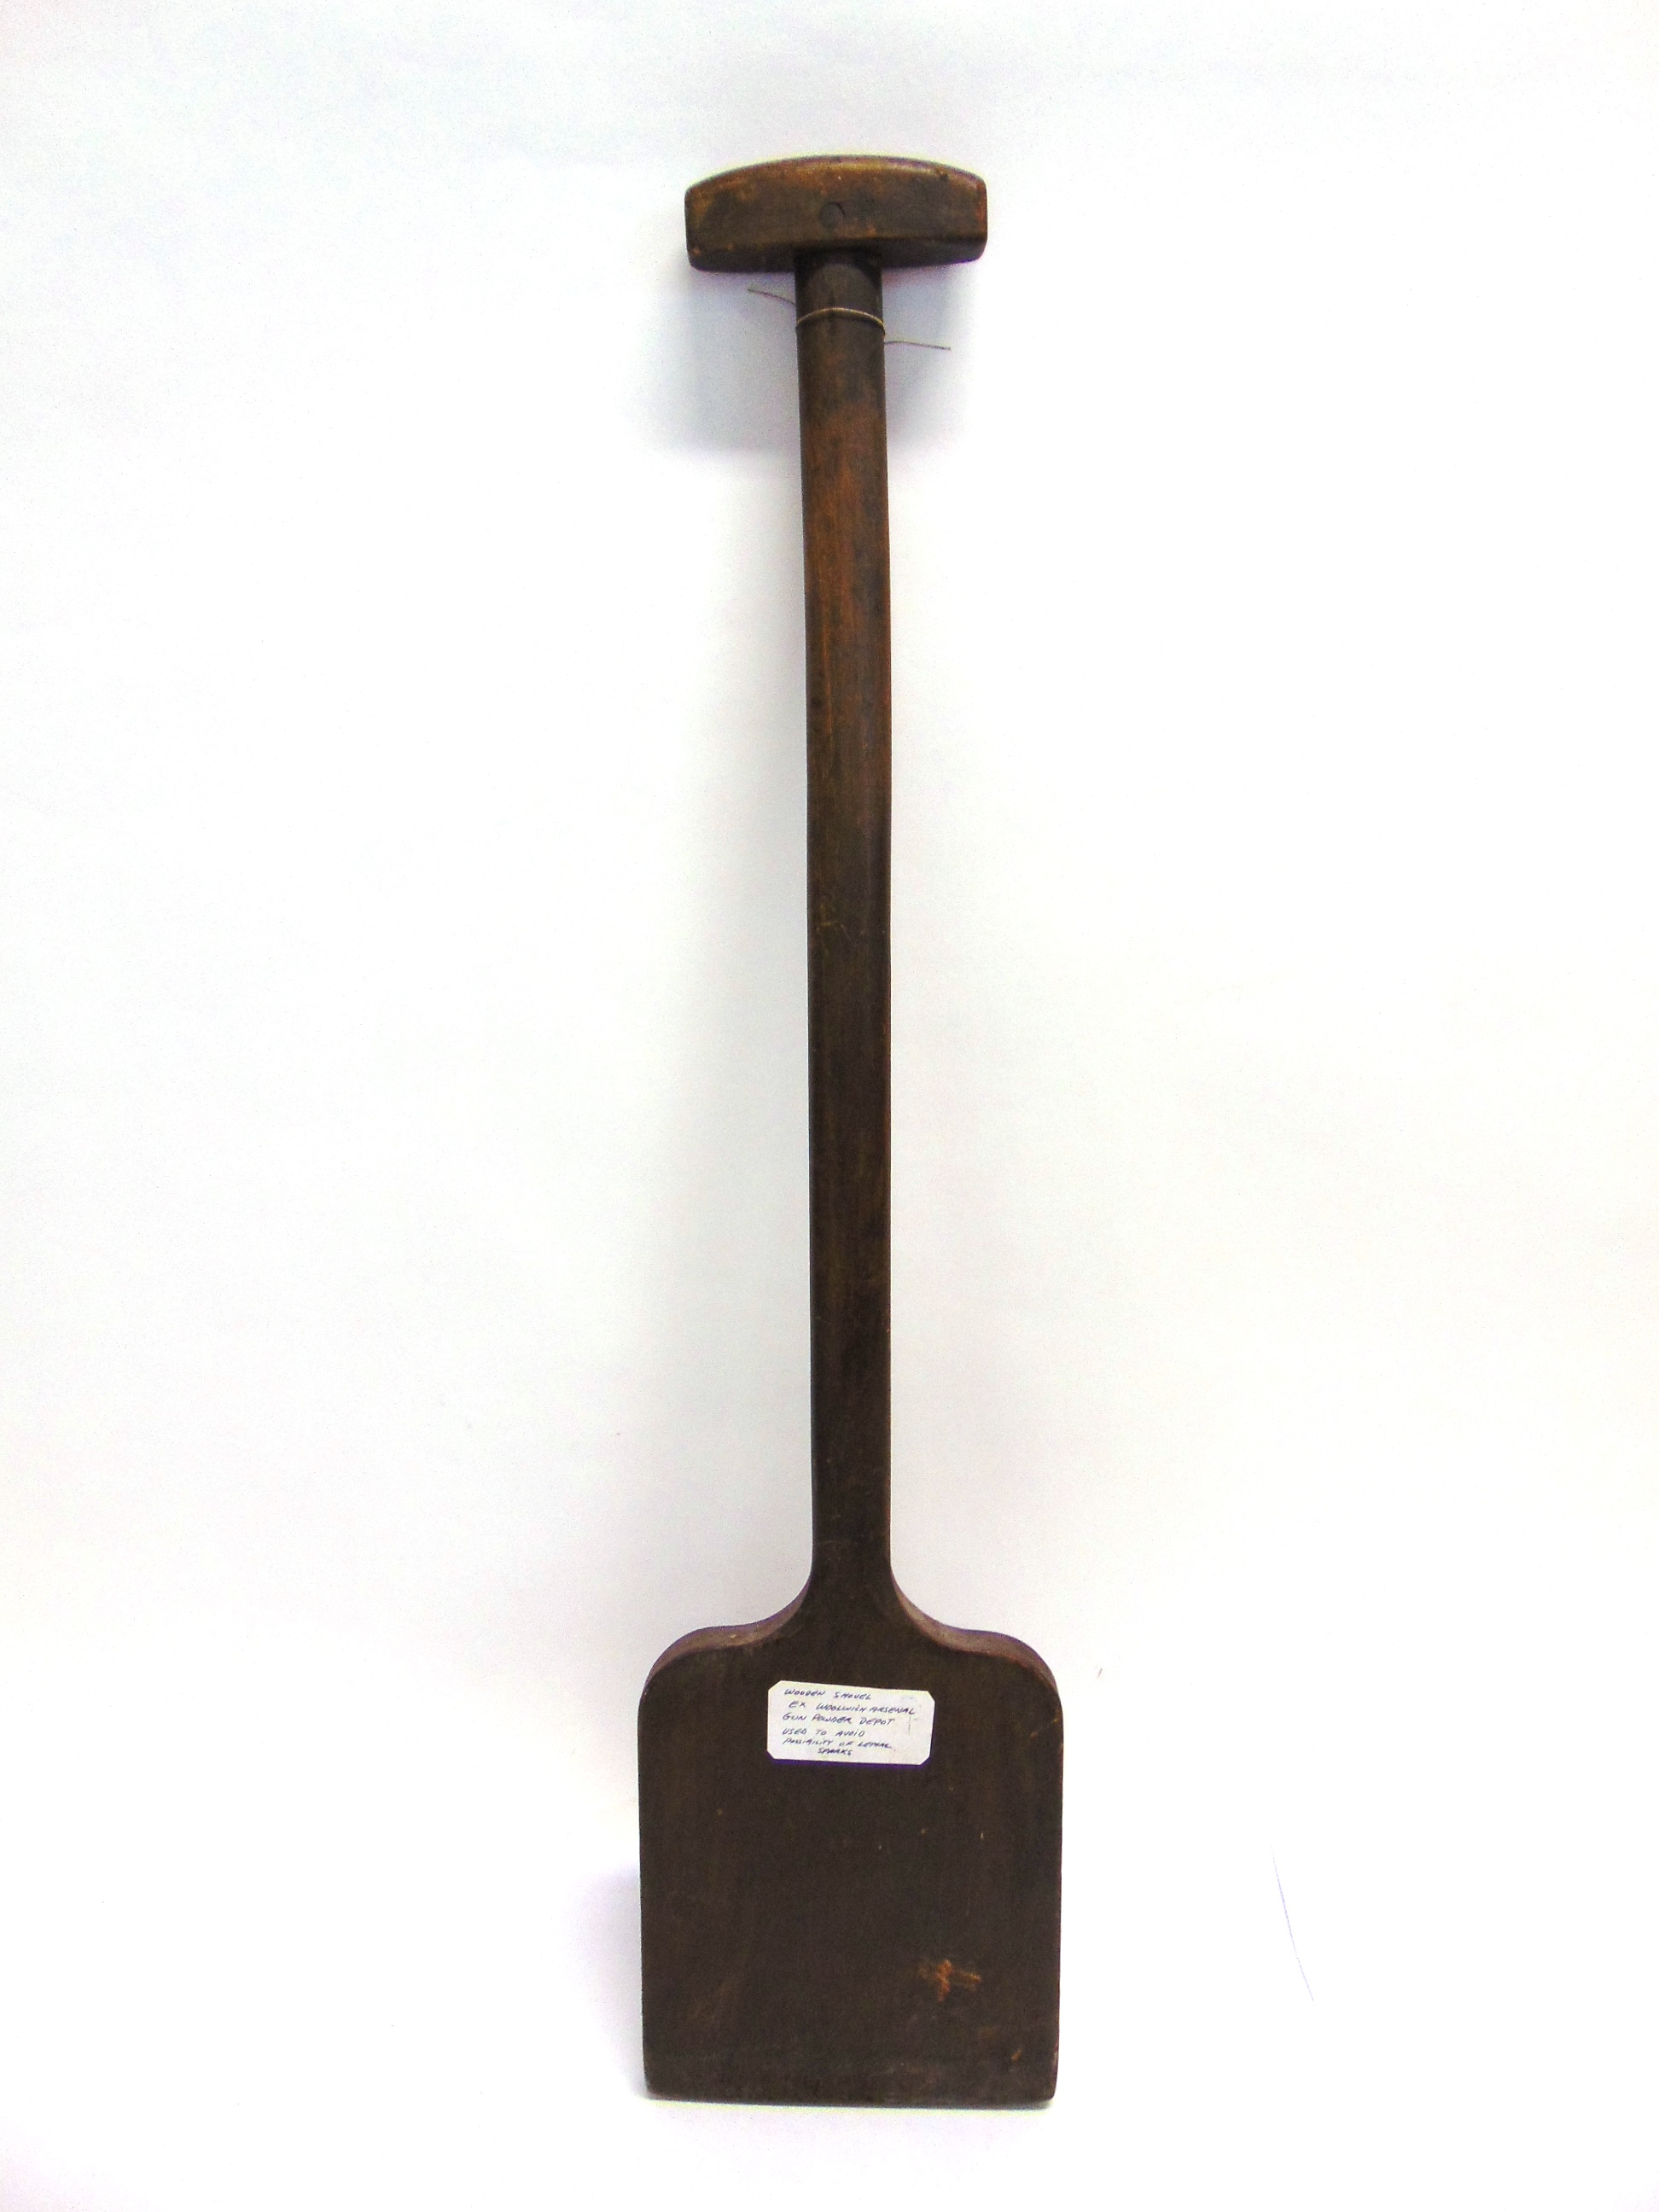 19TH CENTURY - A WOODEN GUNPOWDER SHOVEL FROM THE WOOLWICH ARSENAL  (used to avoid possibilities - Image 2 of 2